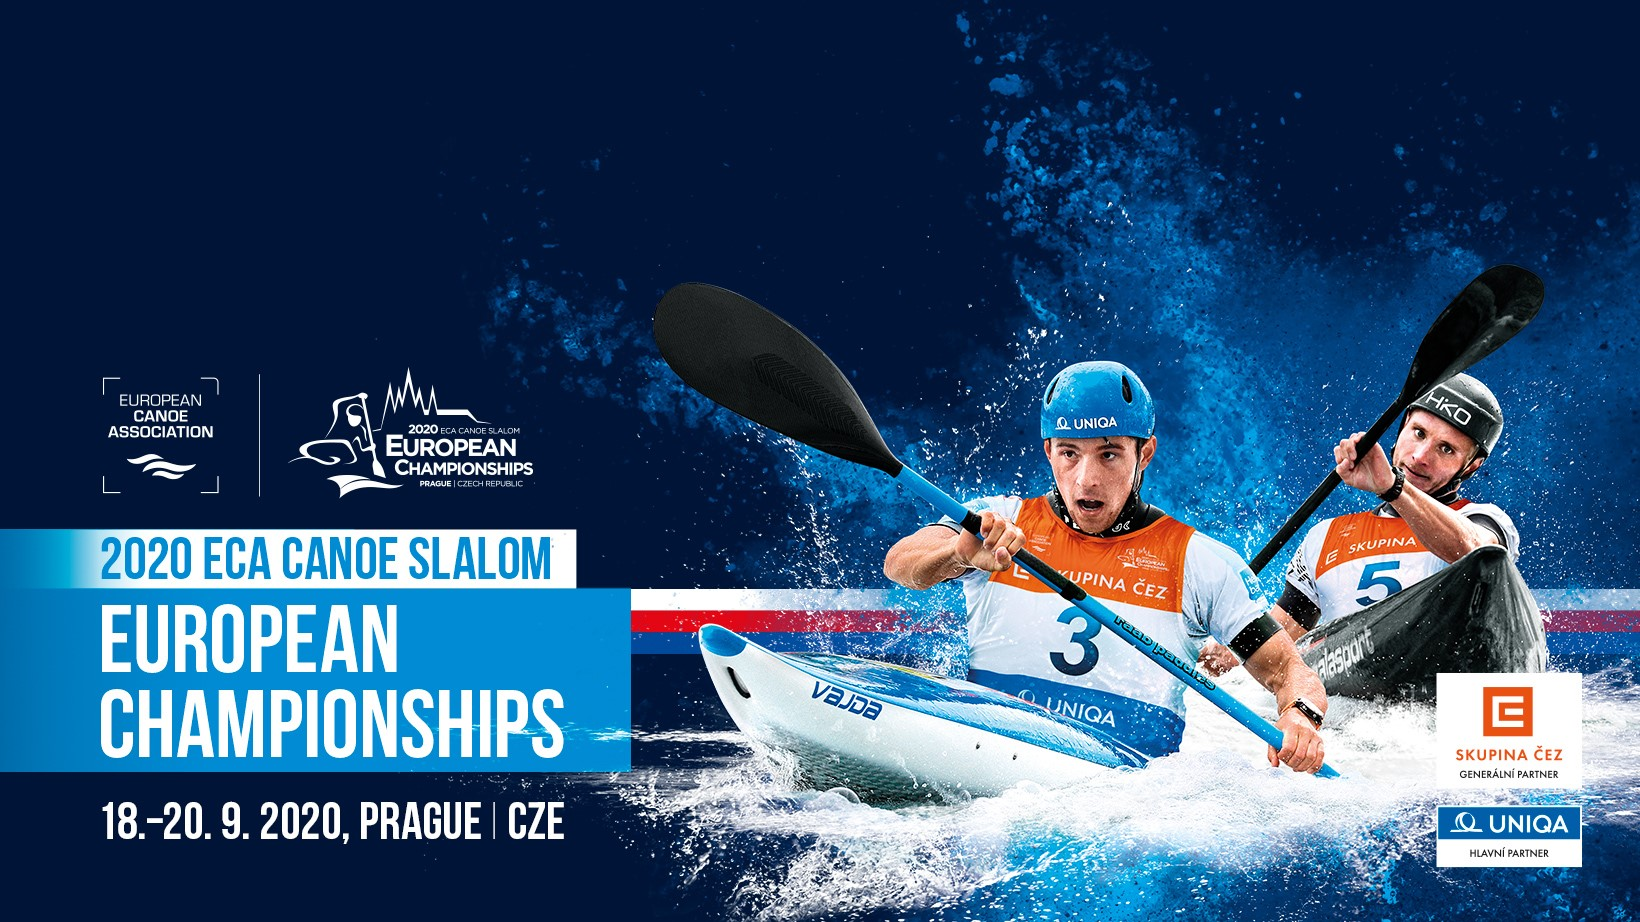 Czech athletes to defend titles as Canoe Slalom European Championships set to begin in Prague